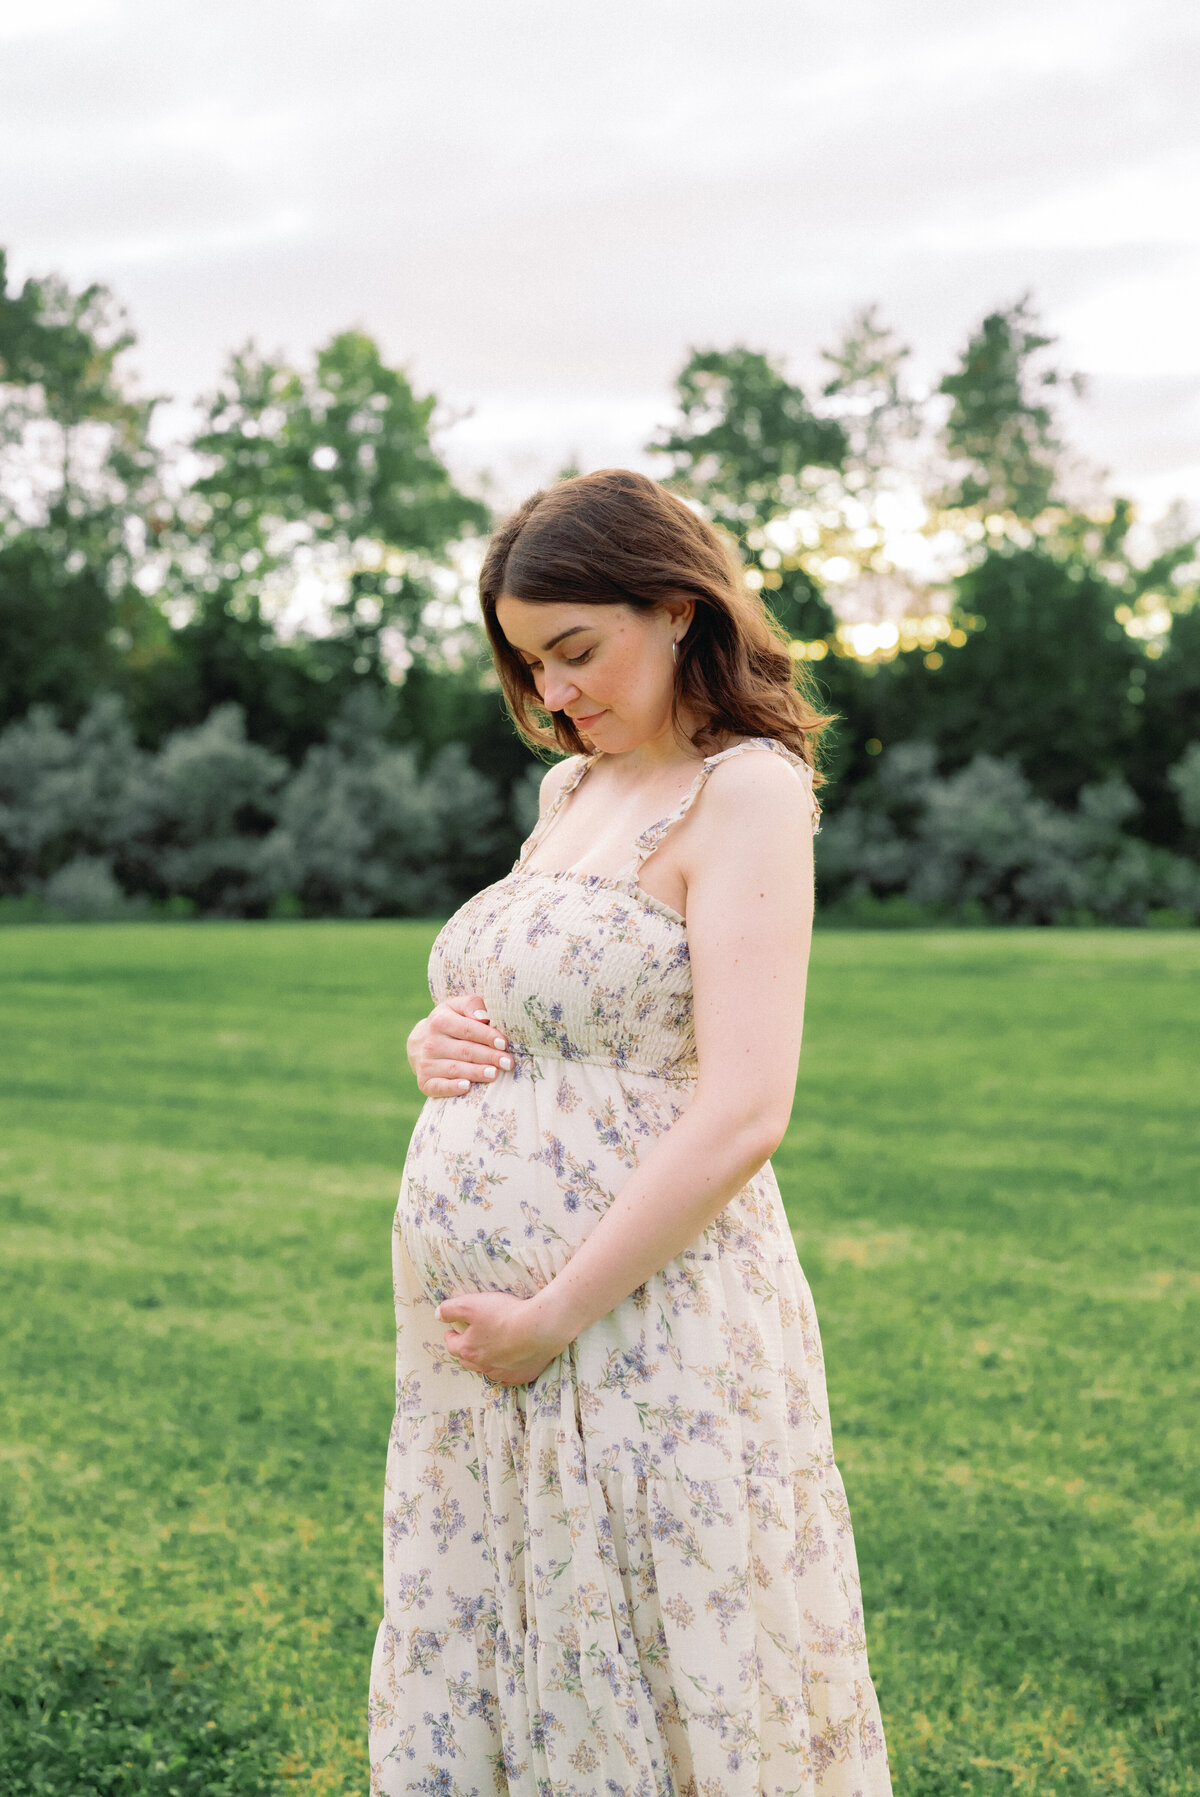 Expecting mother holding baby bump in floral dress